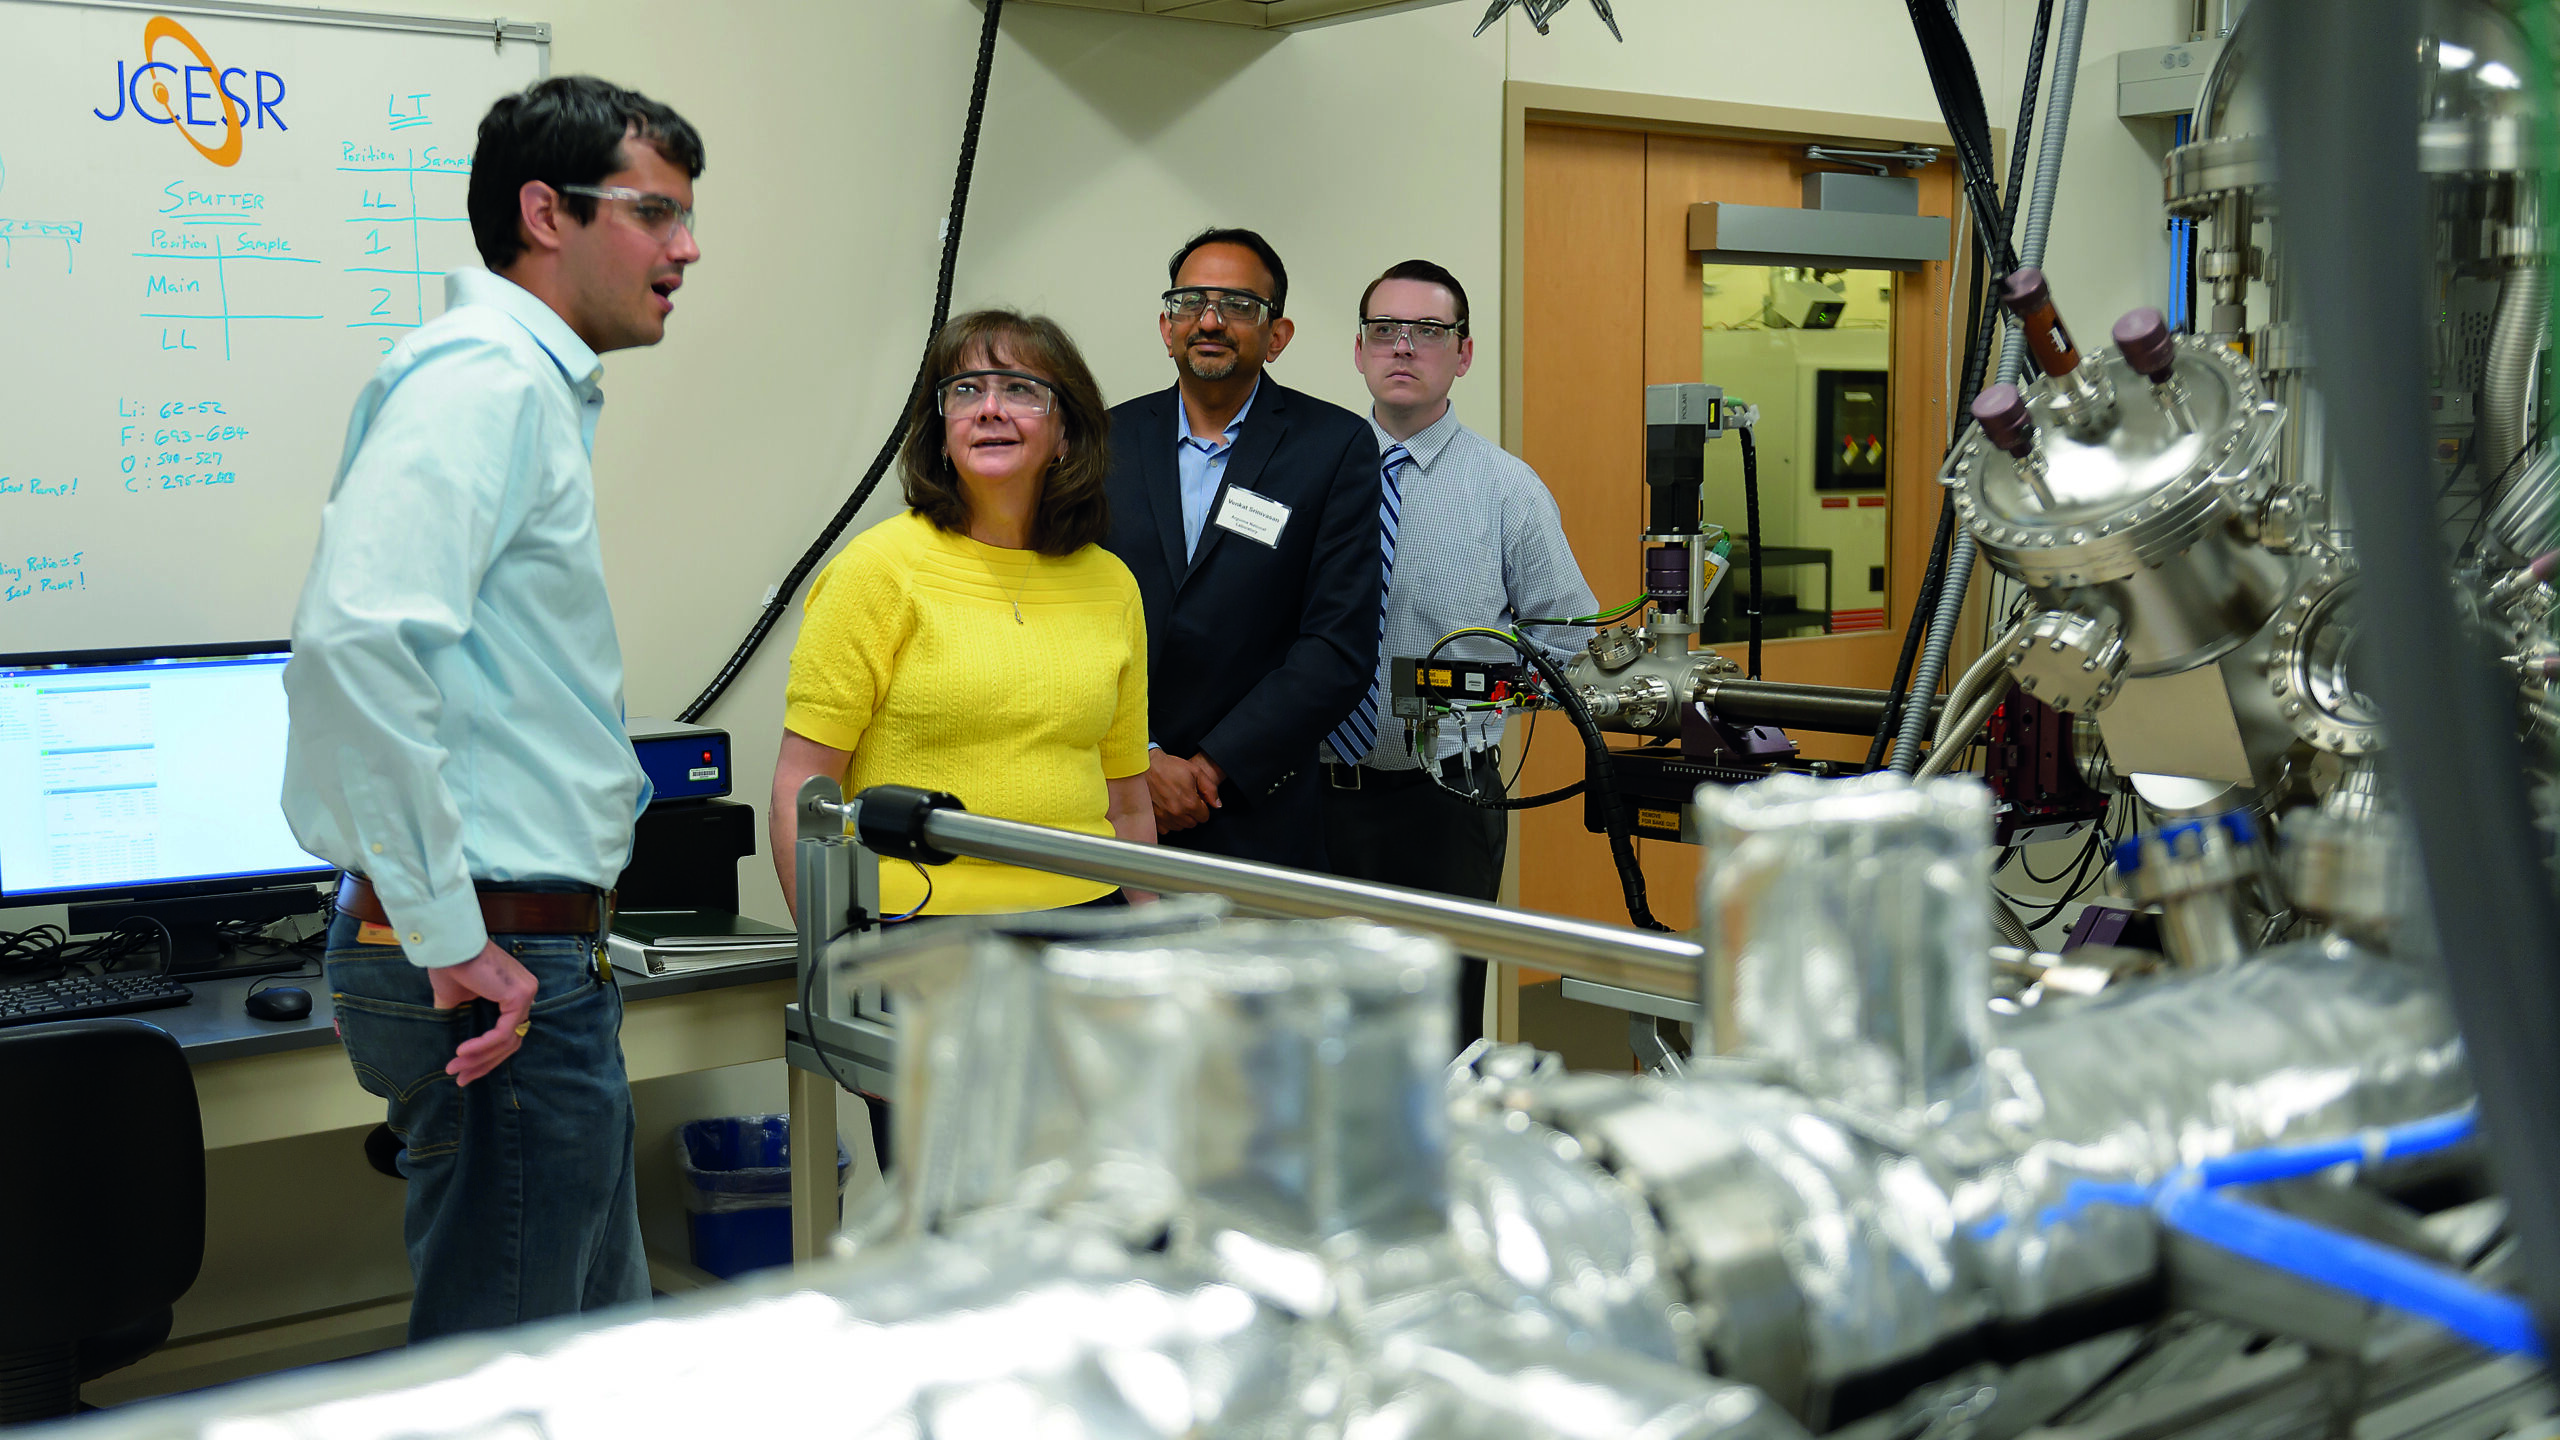 Karen Evans, Assistant Secretary of DOE's Office of Cybersecurity, Energy Security and Emergency Response, visited Argonne on Friday June 14.